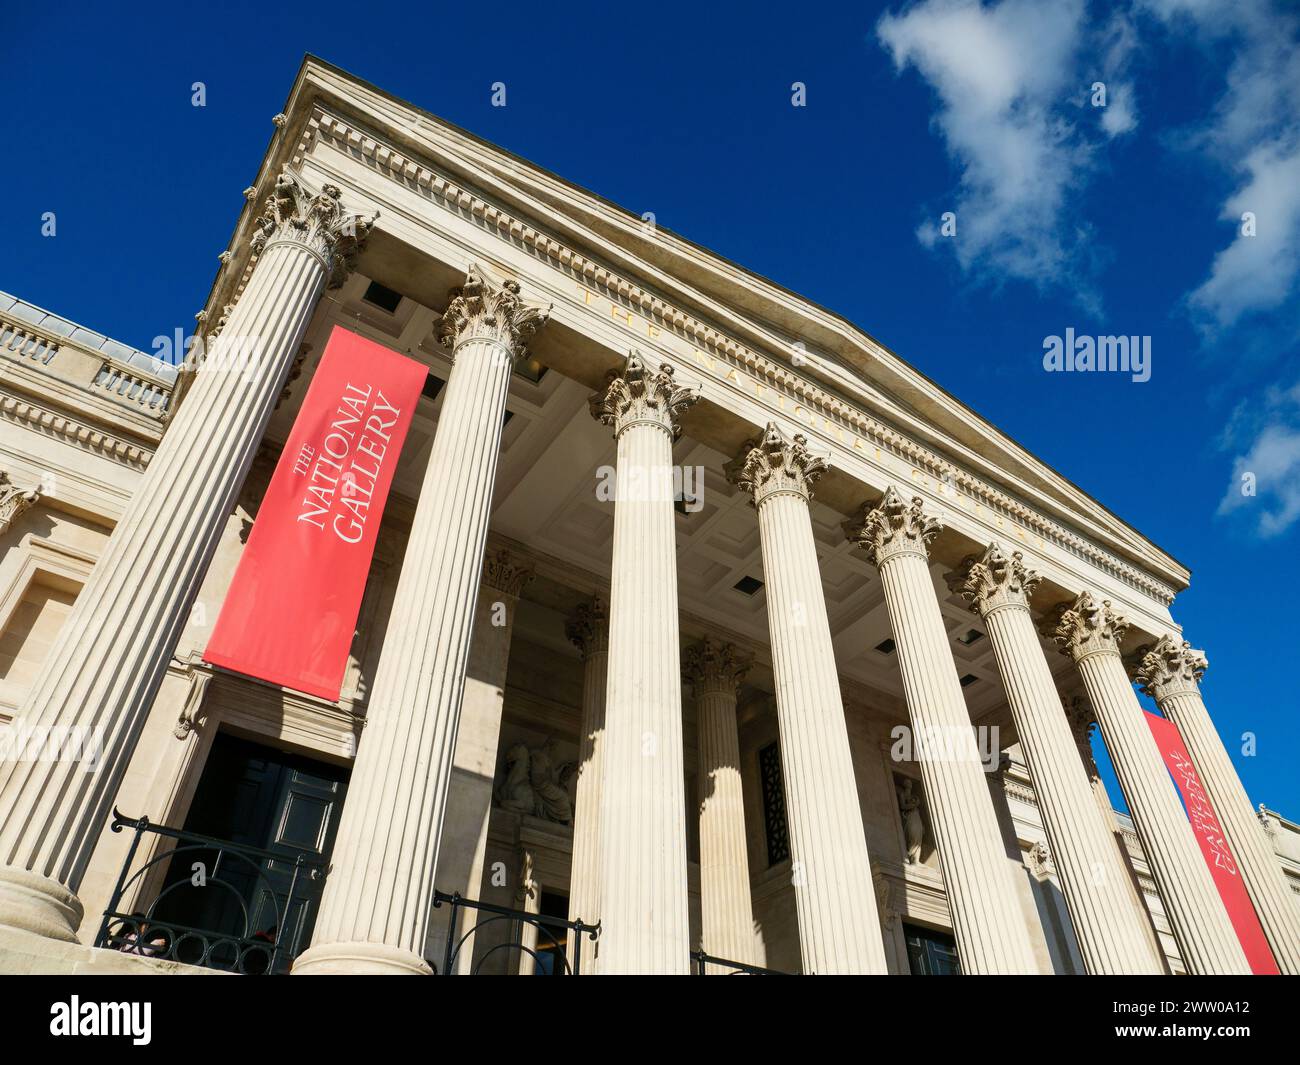 Exterior of the National Gallery, London, UK Stock Photo